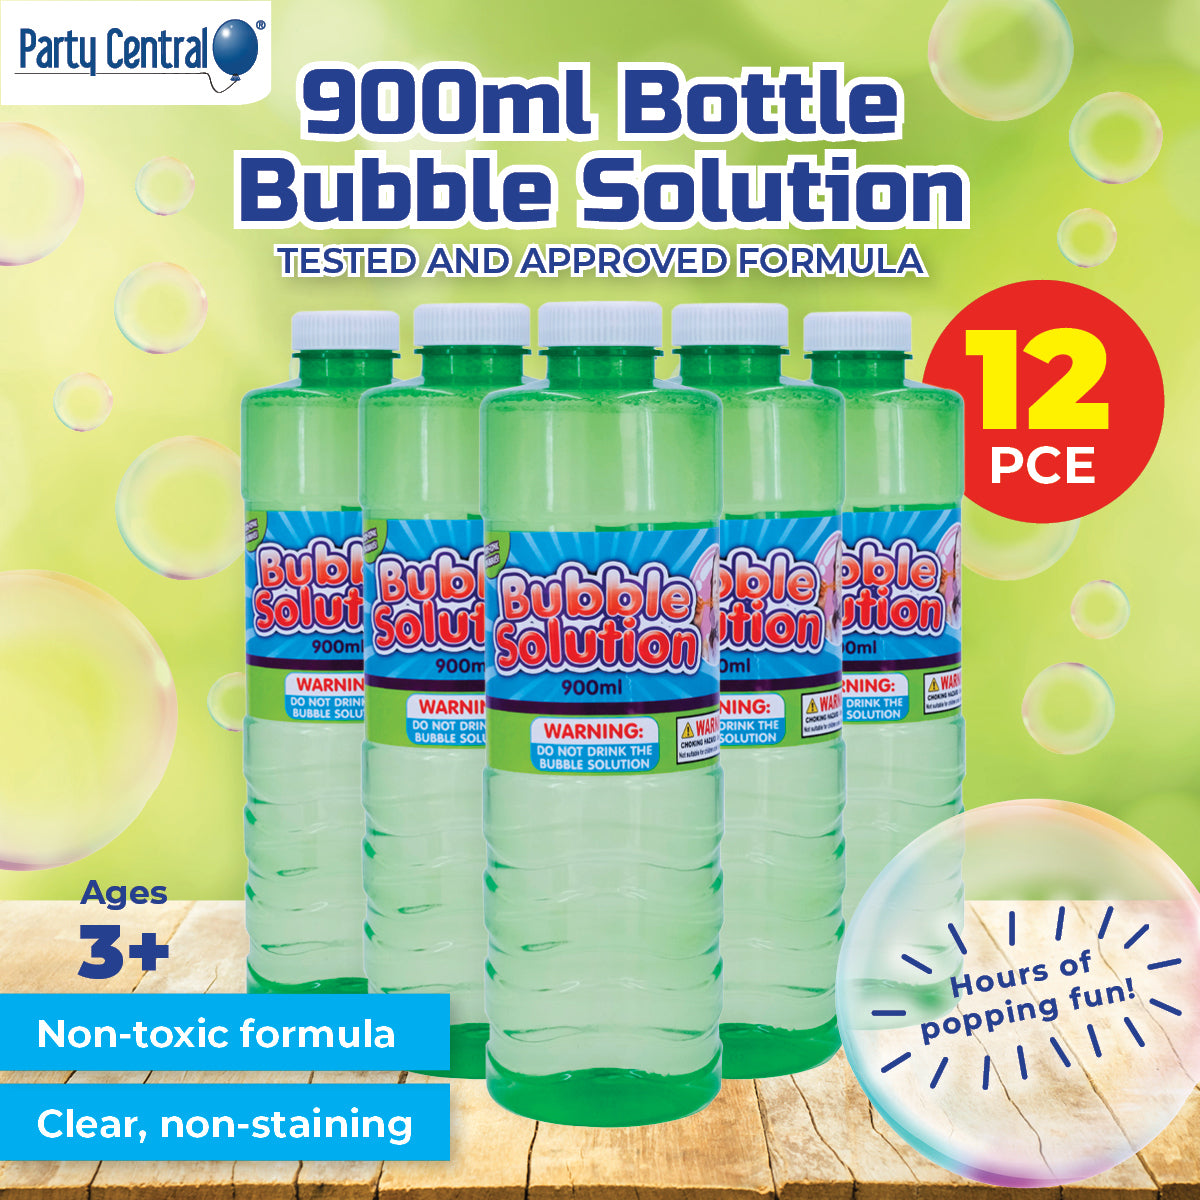 Party Central 12PCE Bubble Solution Non-Toxic Unscented Non-Staining 900ml